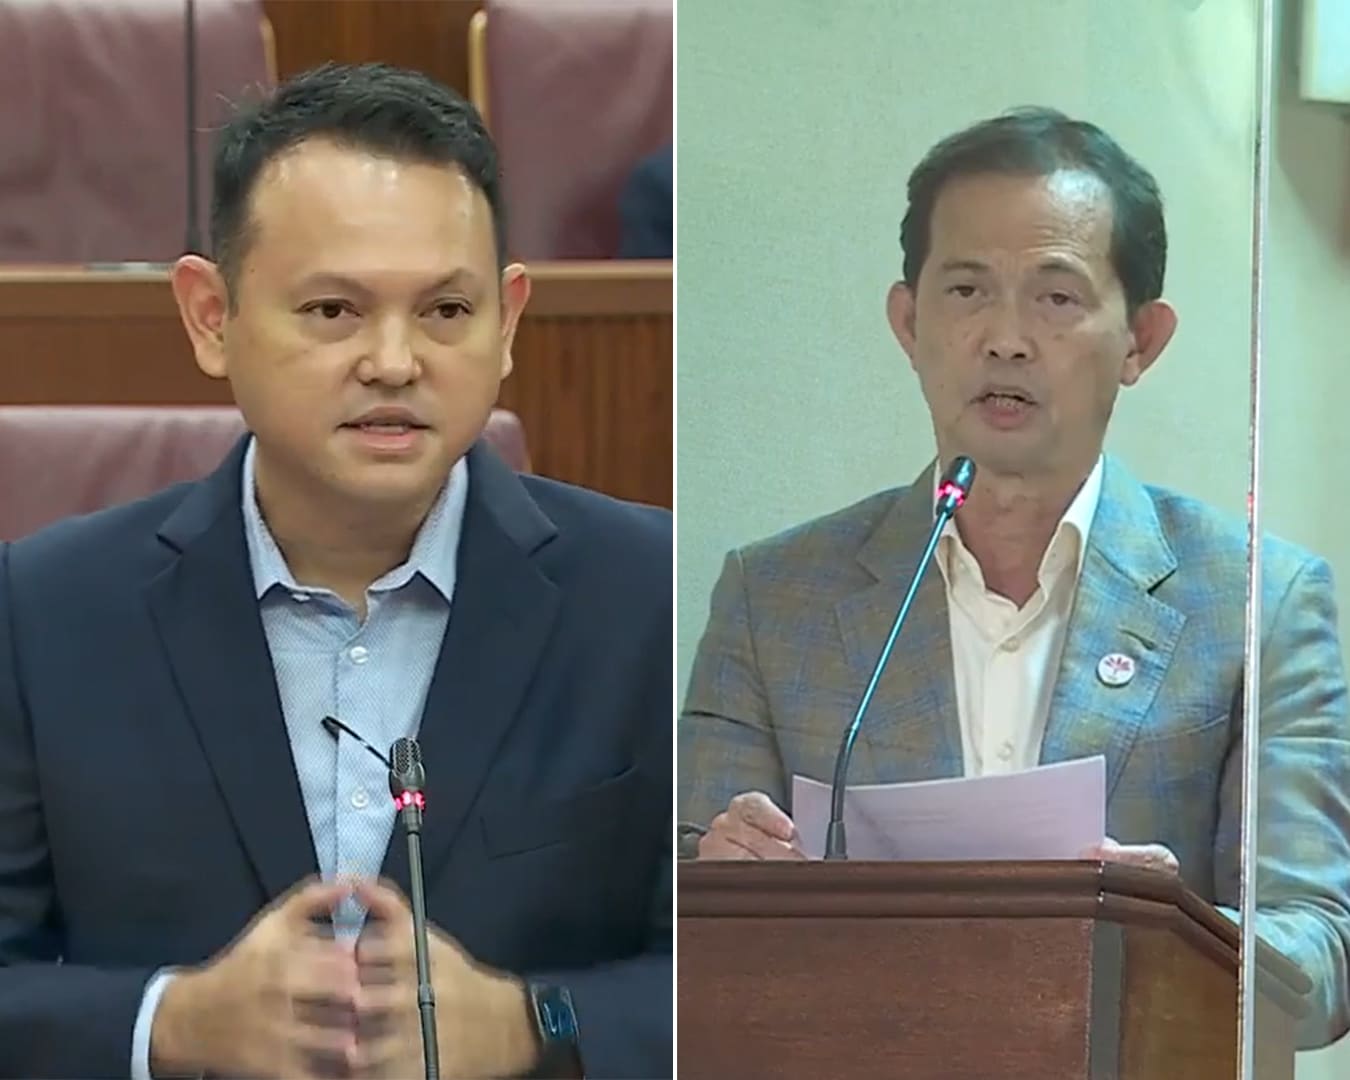 Mr Zaqy Mohamad (left), Deputy Leader of the House, said that Mr Leong Mun Wai (right) published Facebook posts, which suggested that Speaker of Parliament Tan Chuan-Jin could have called on Mr Leong but deliberately did not do so for improper reasons.